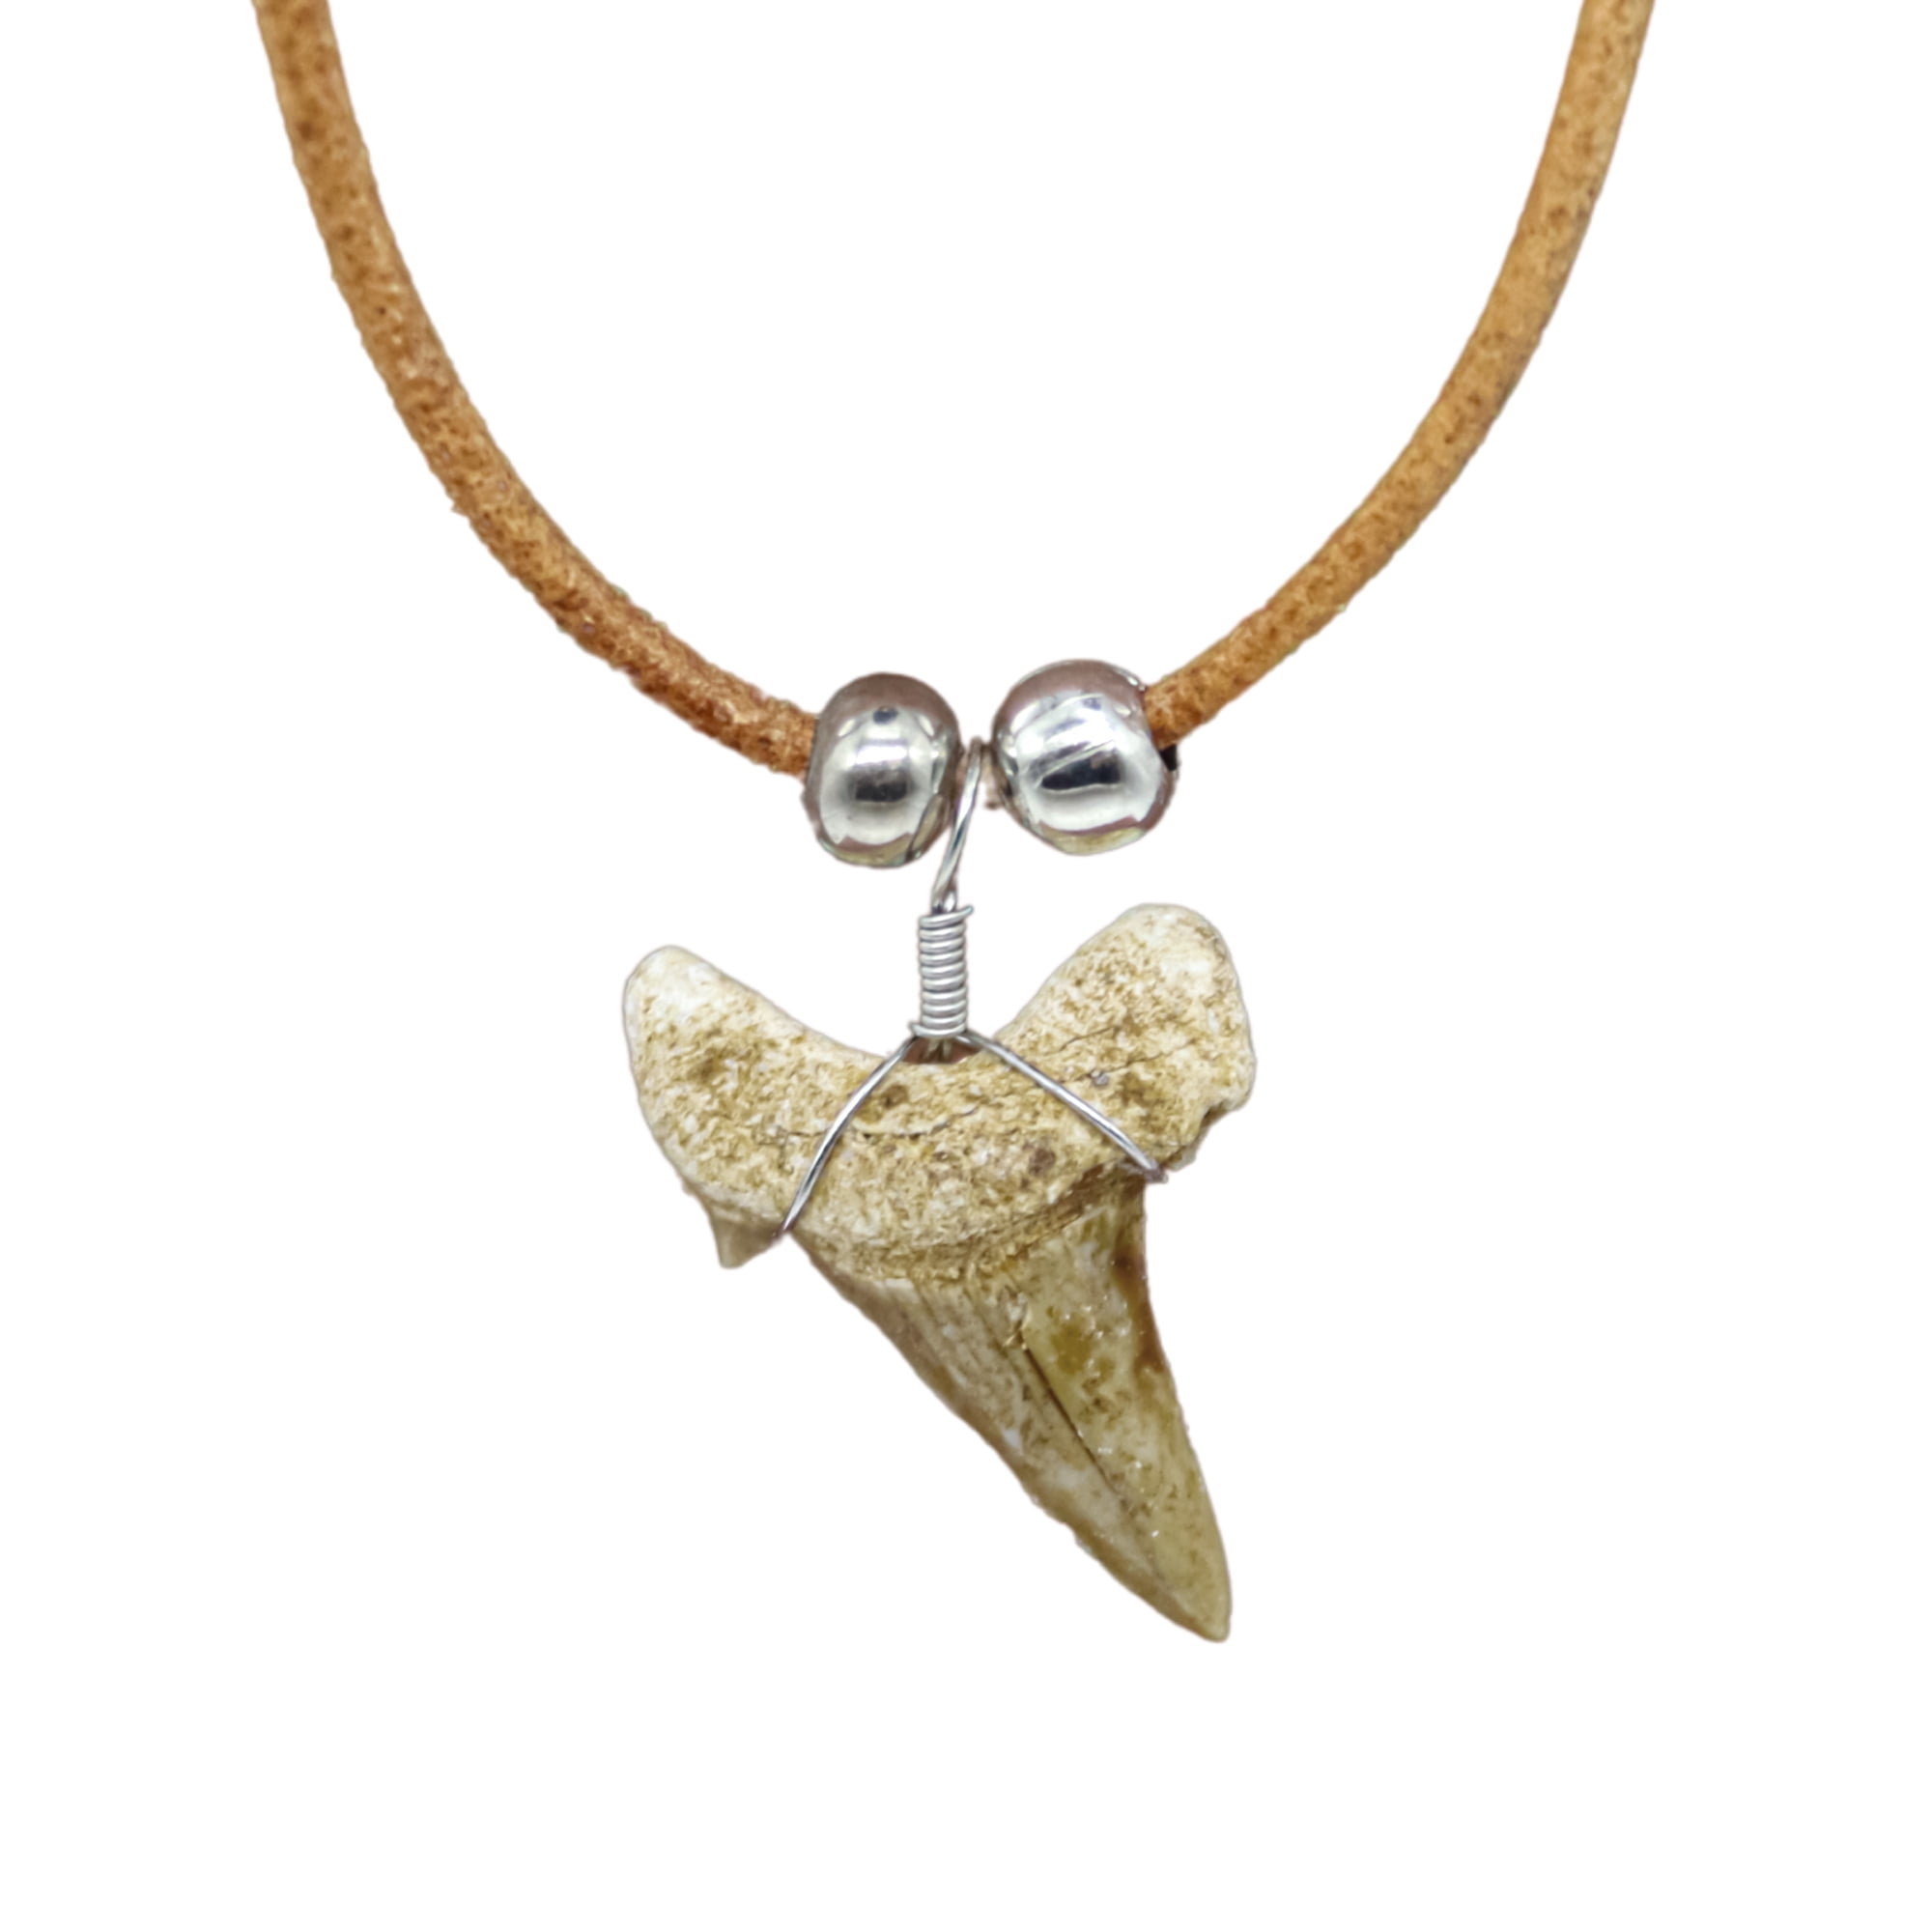 Fablinks Shark Tooth Necklace for Boys, Genuine Fossil Teeth Necklaces for Men